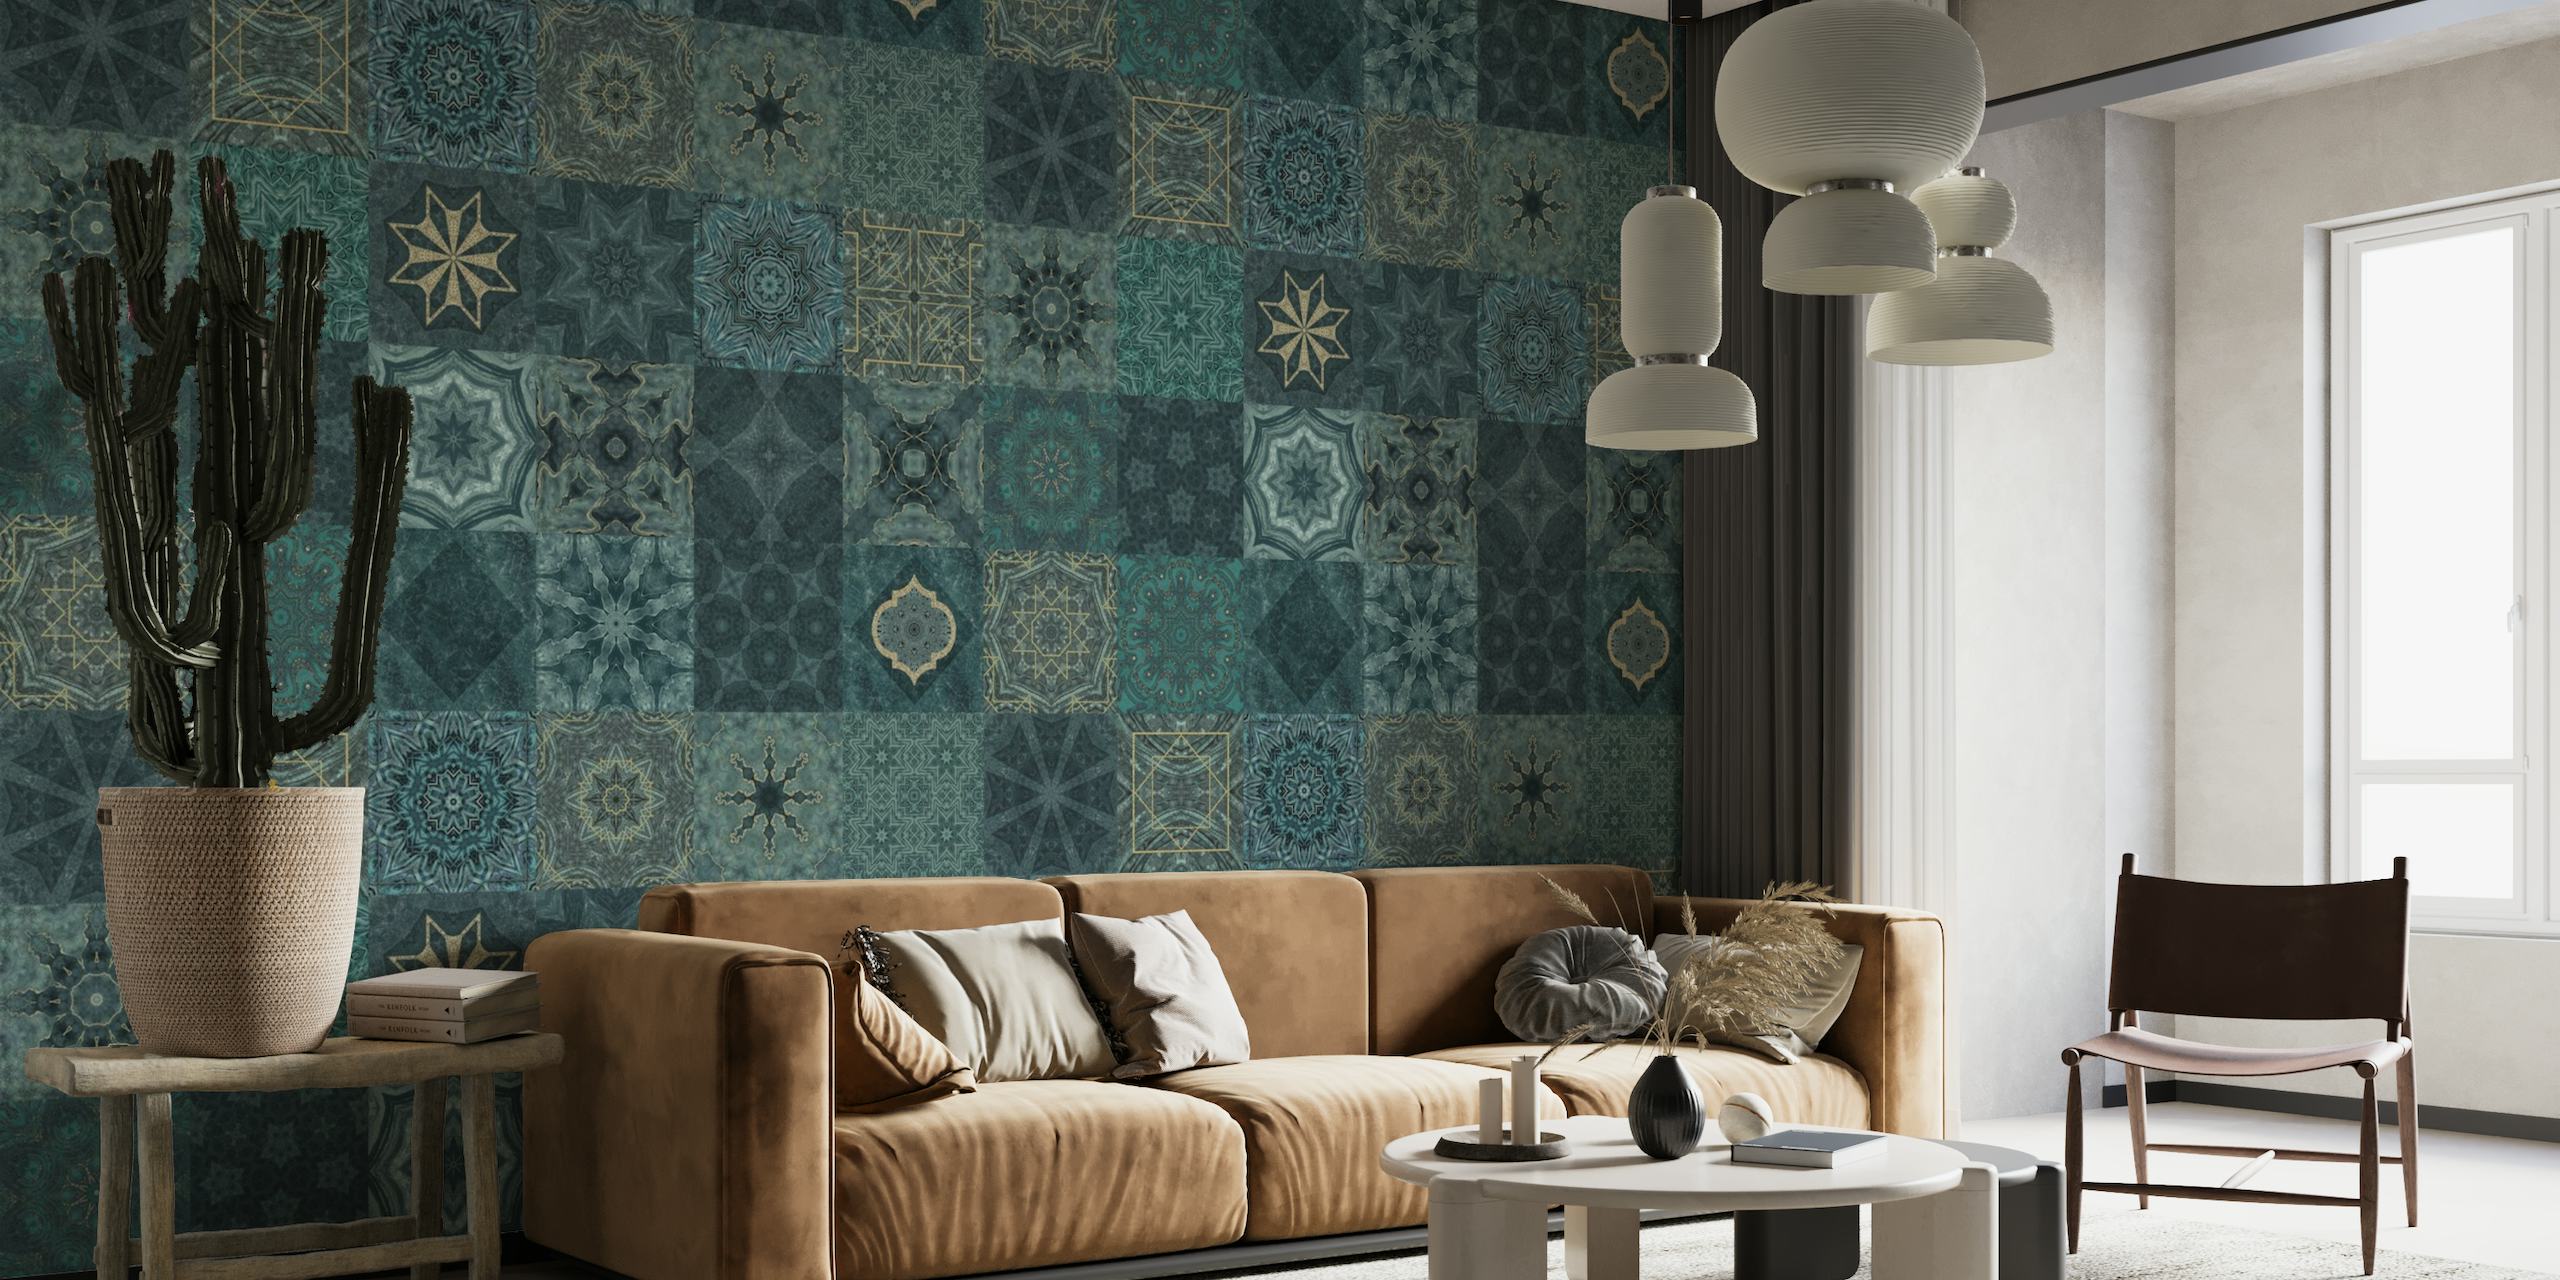 Oriental Mediterranean Tiles Wall Mural featuring turquoise and gold patterns